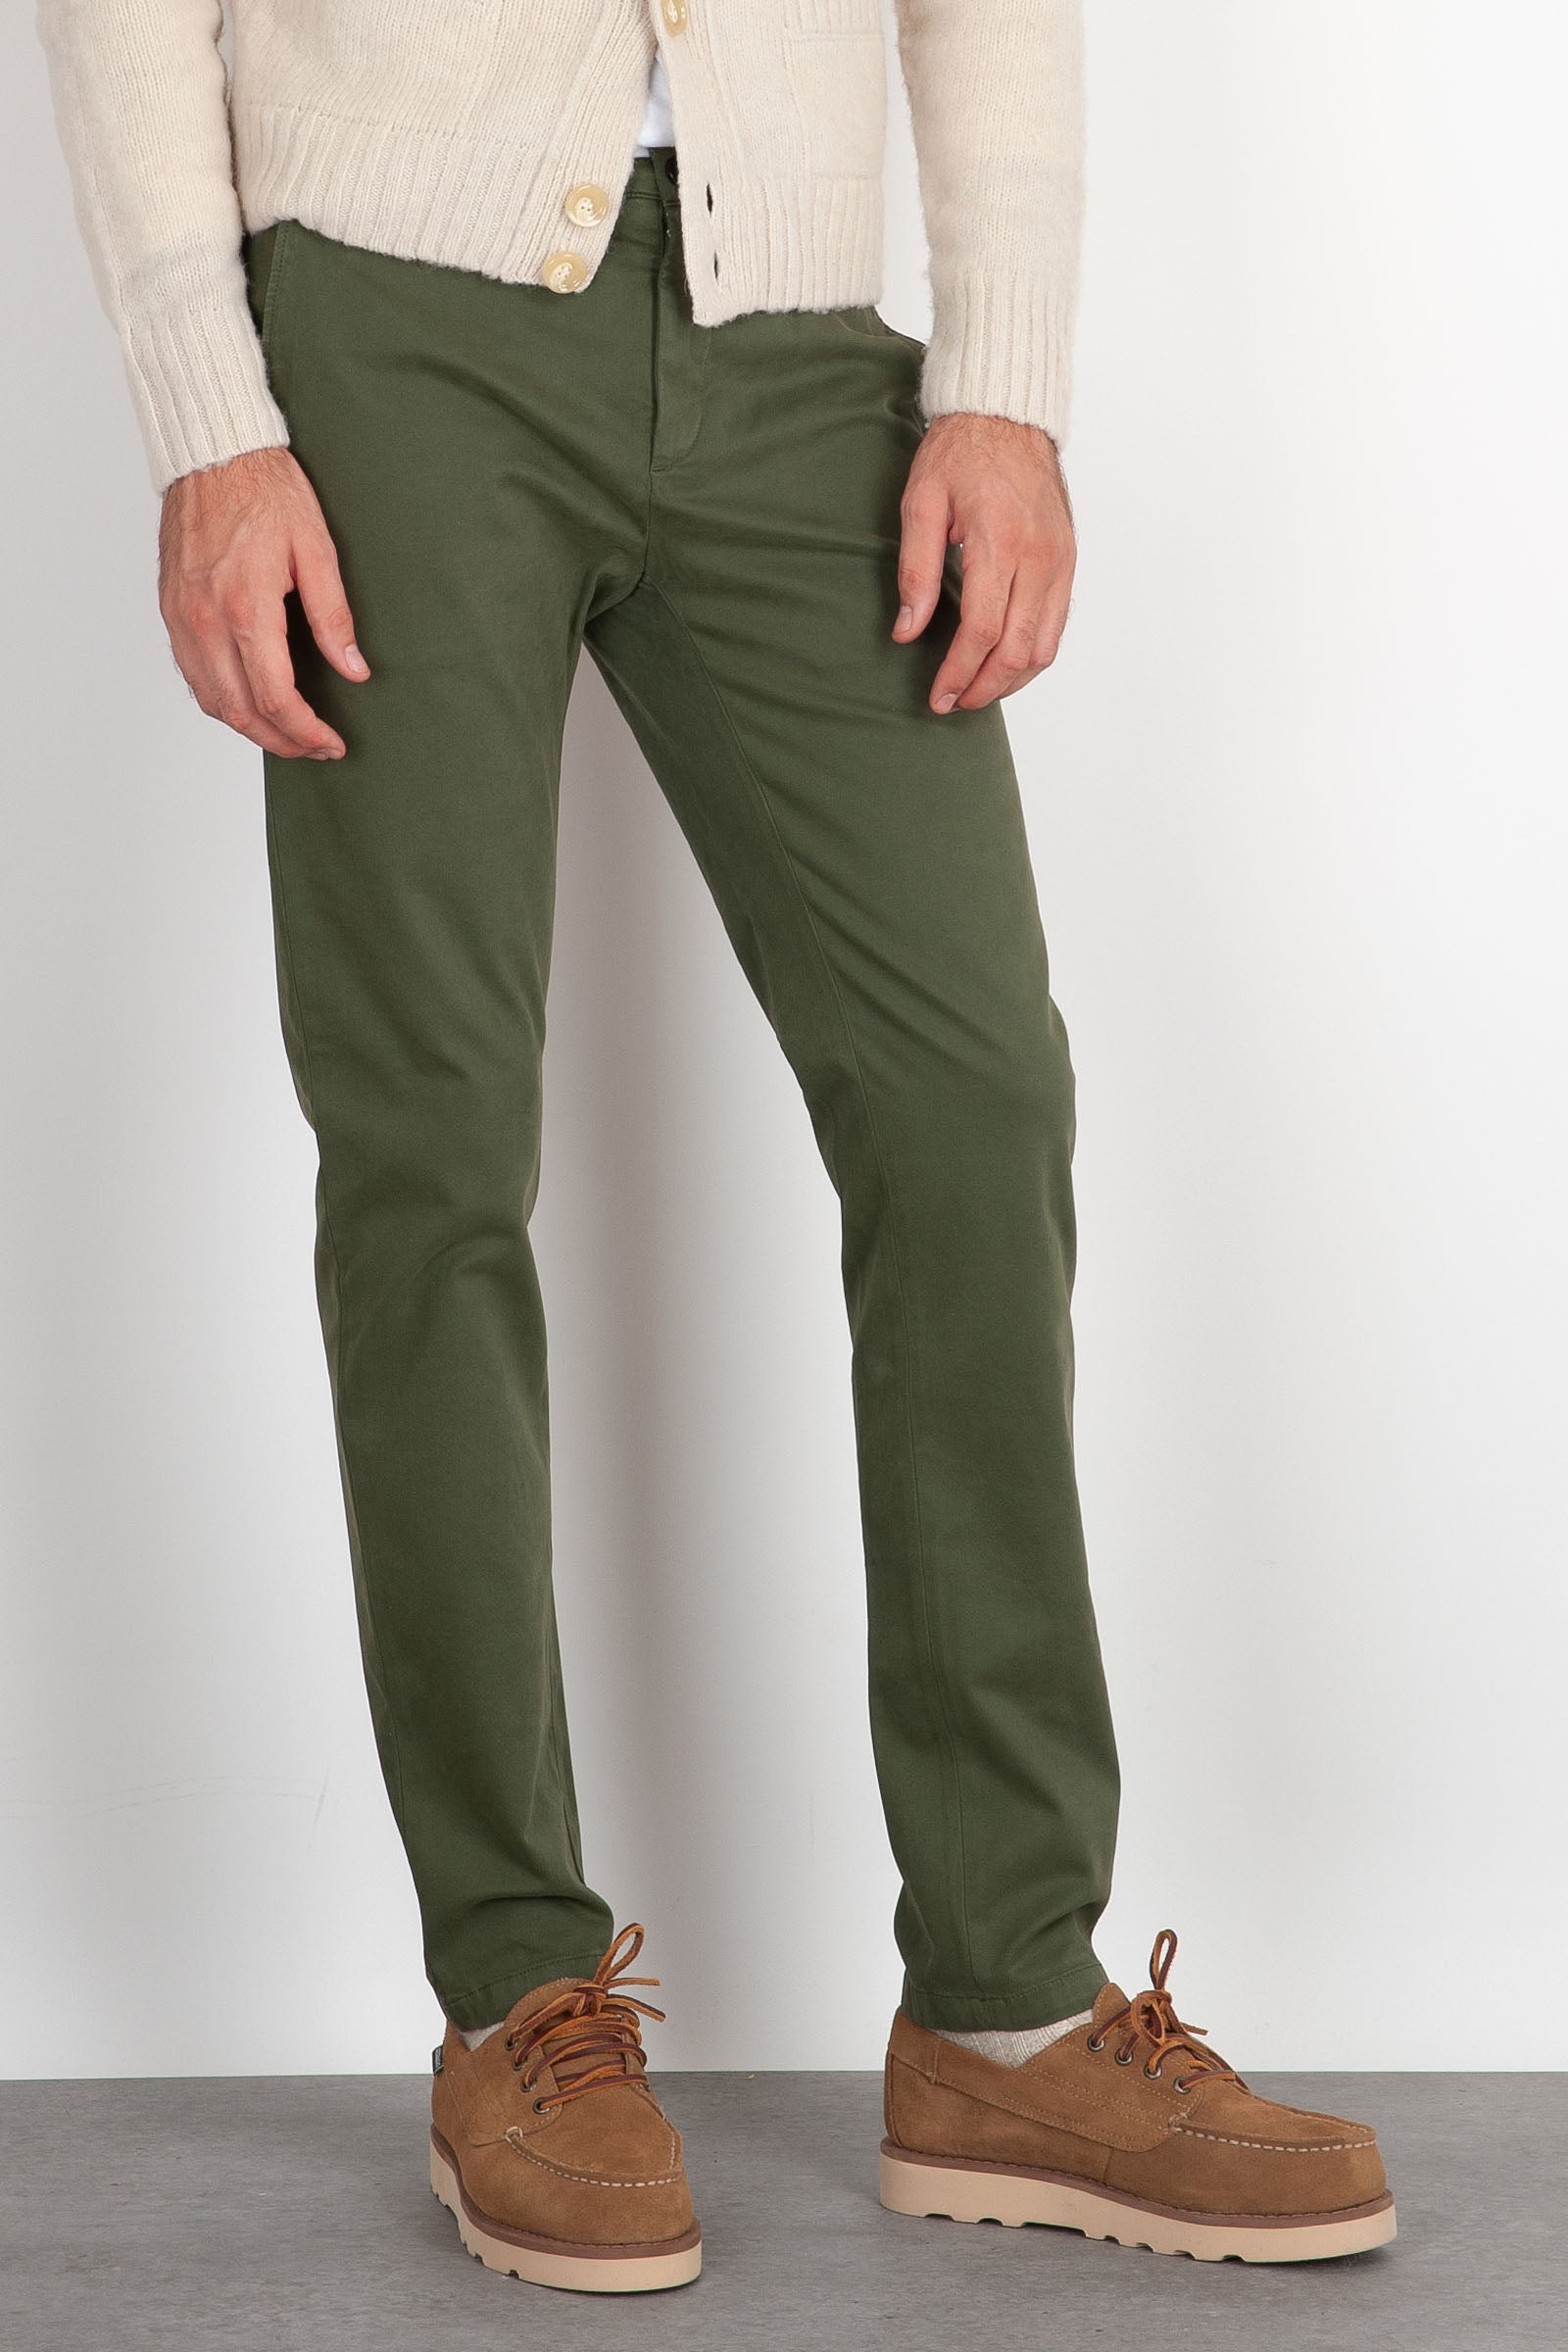 Department Five Mike Green Cotton Trousers - 4